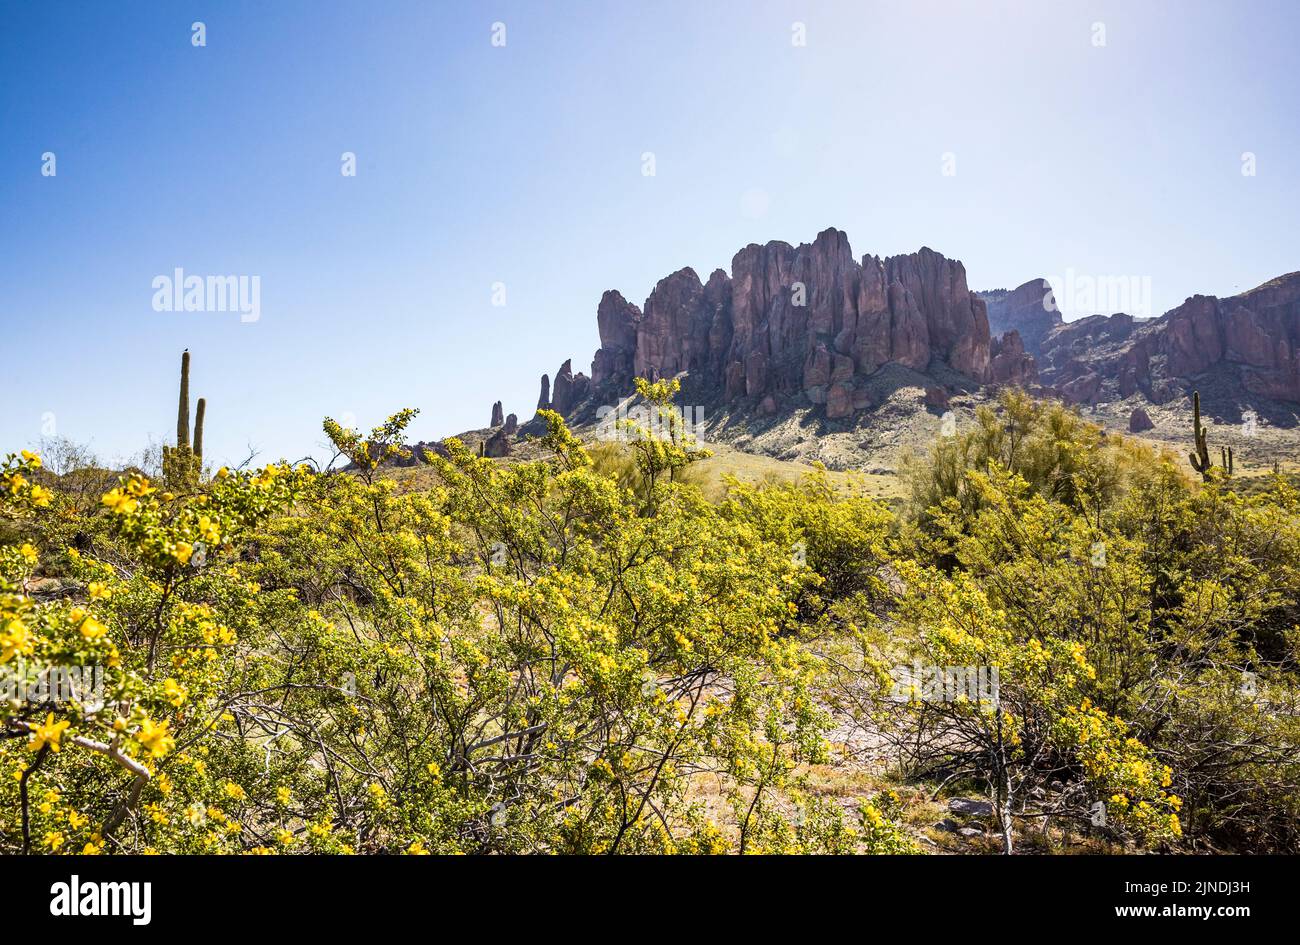 Steep rock formations in Lost Dutchman State Park, Arizona, USA. Stock Photo